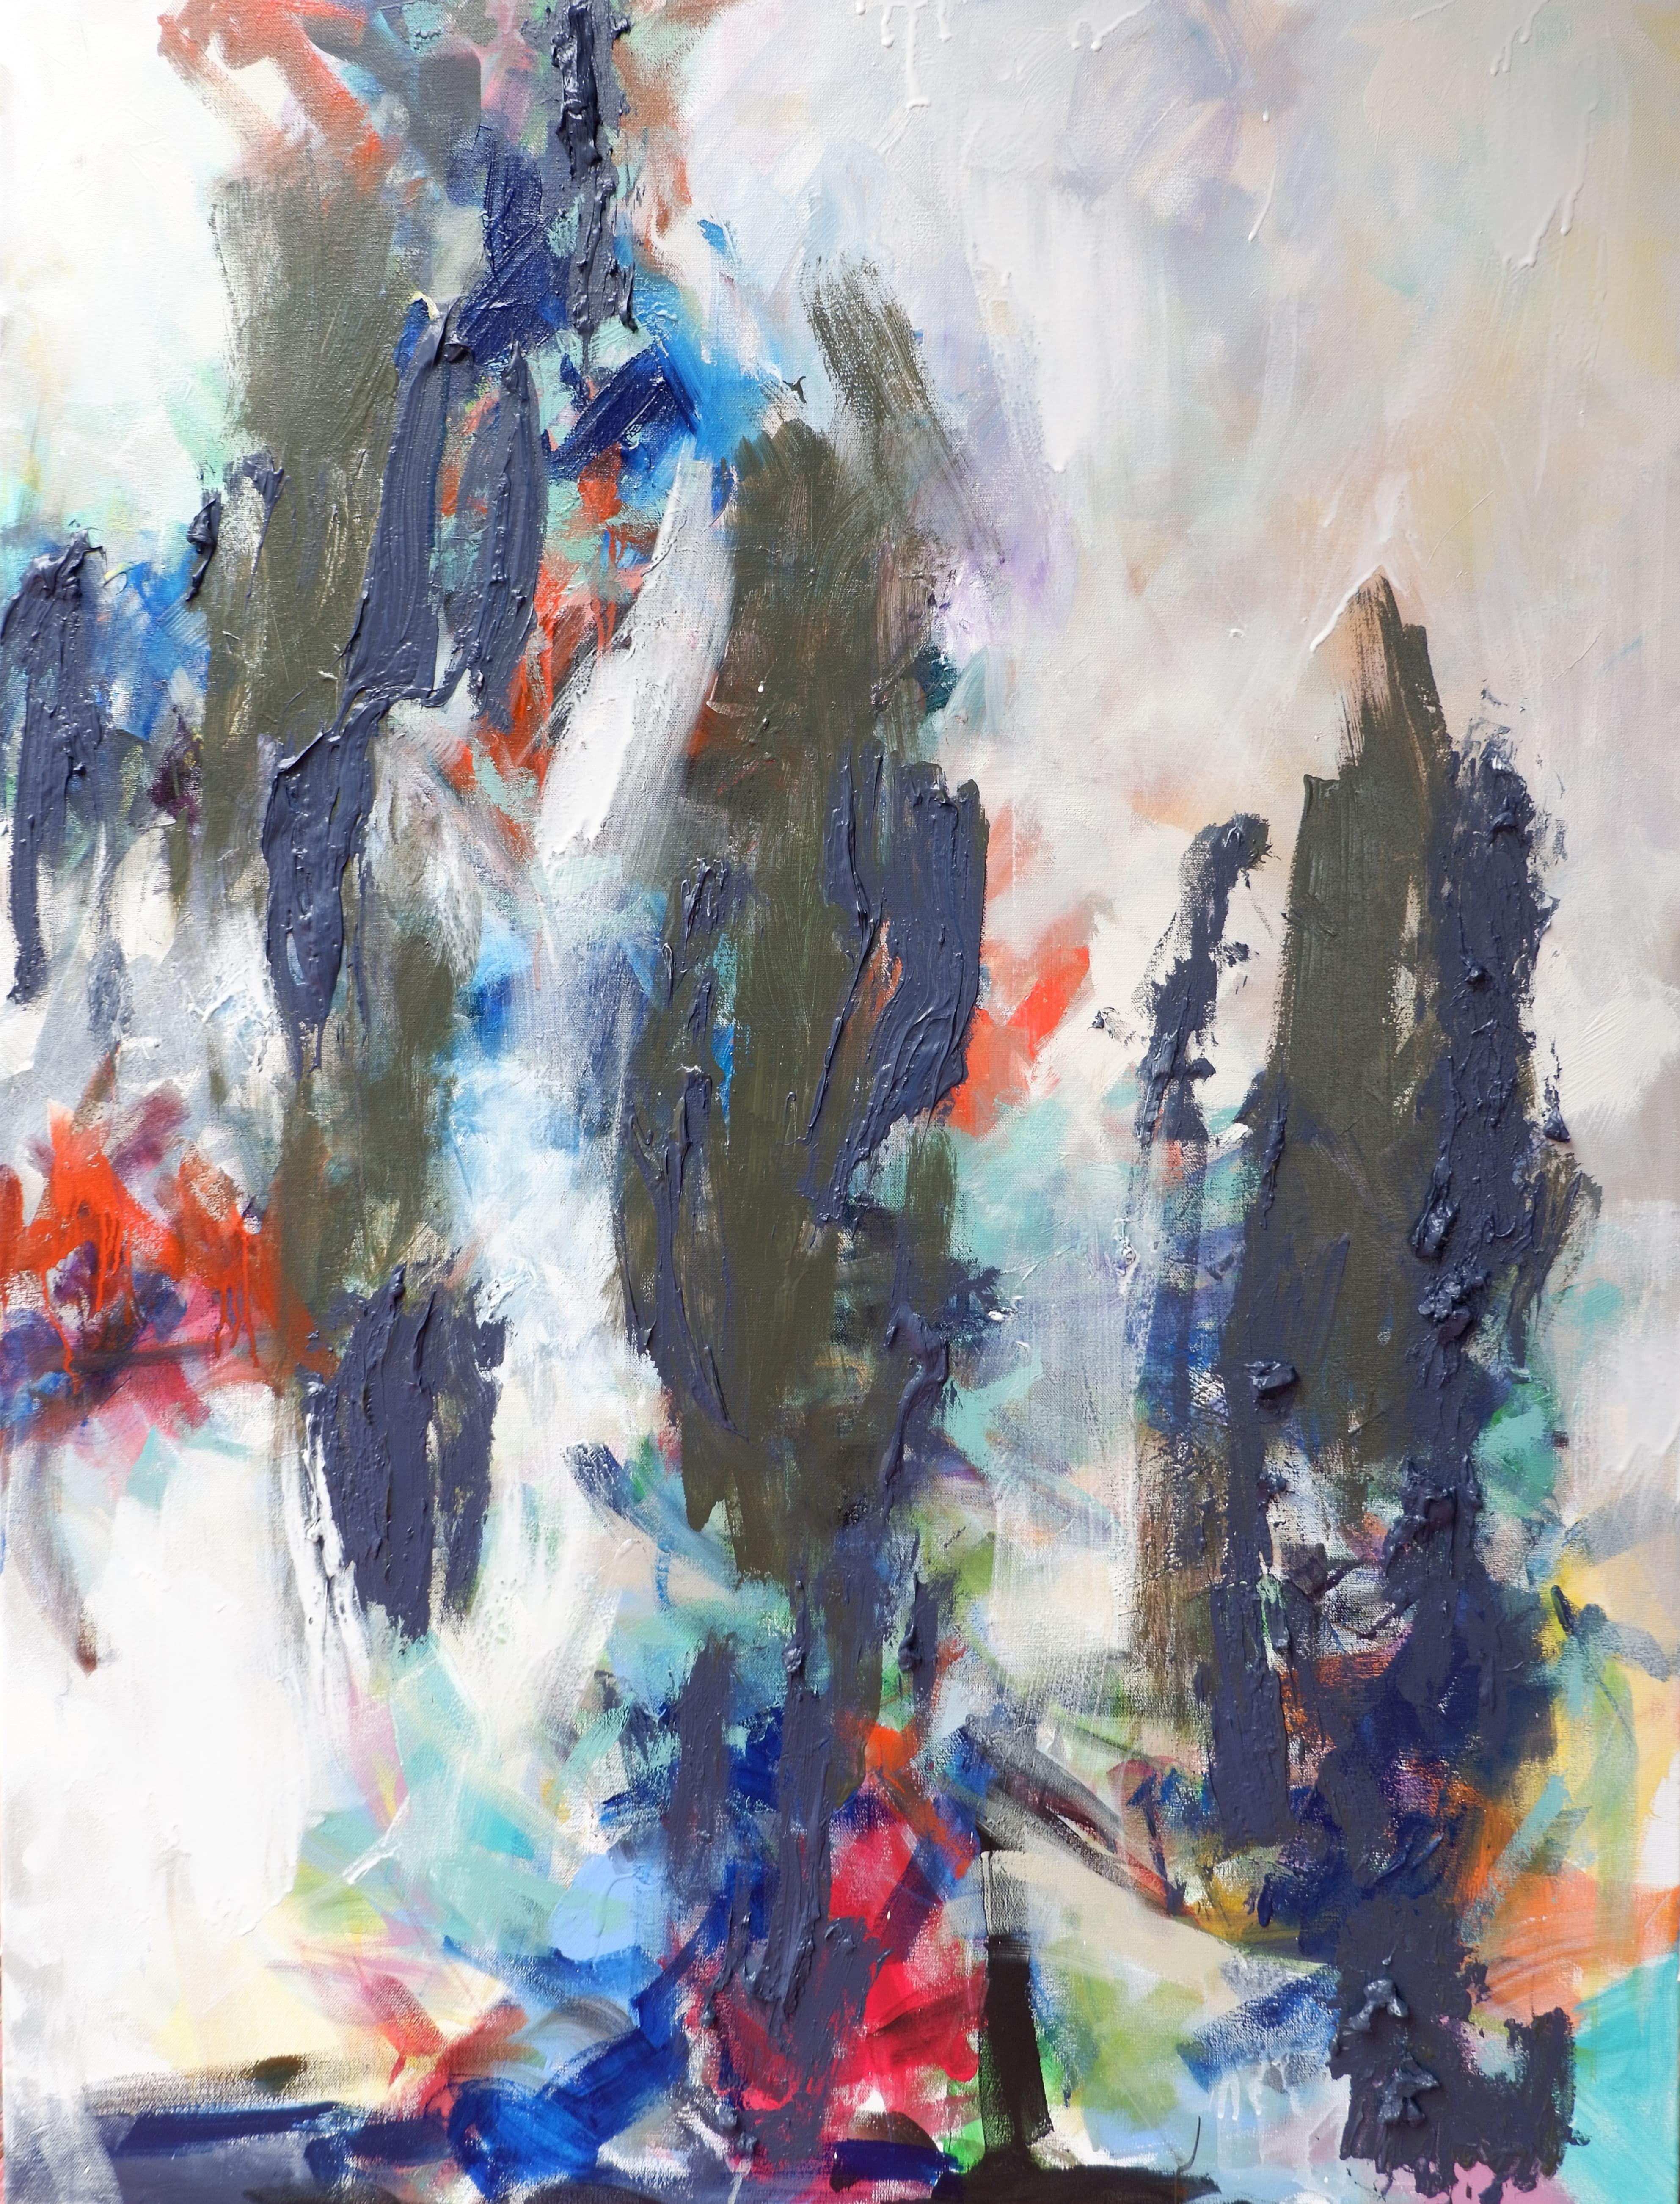 Cheryl Johnson Abstract Painting - Suddenly Admiring Joan Mitchell N┬░20181101, Painting, Oil on Canvas